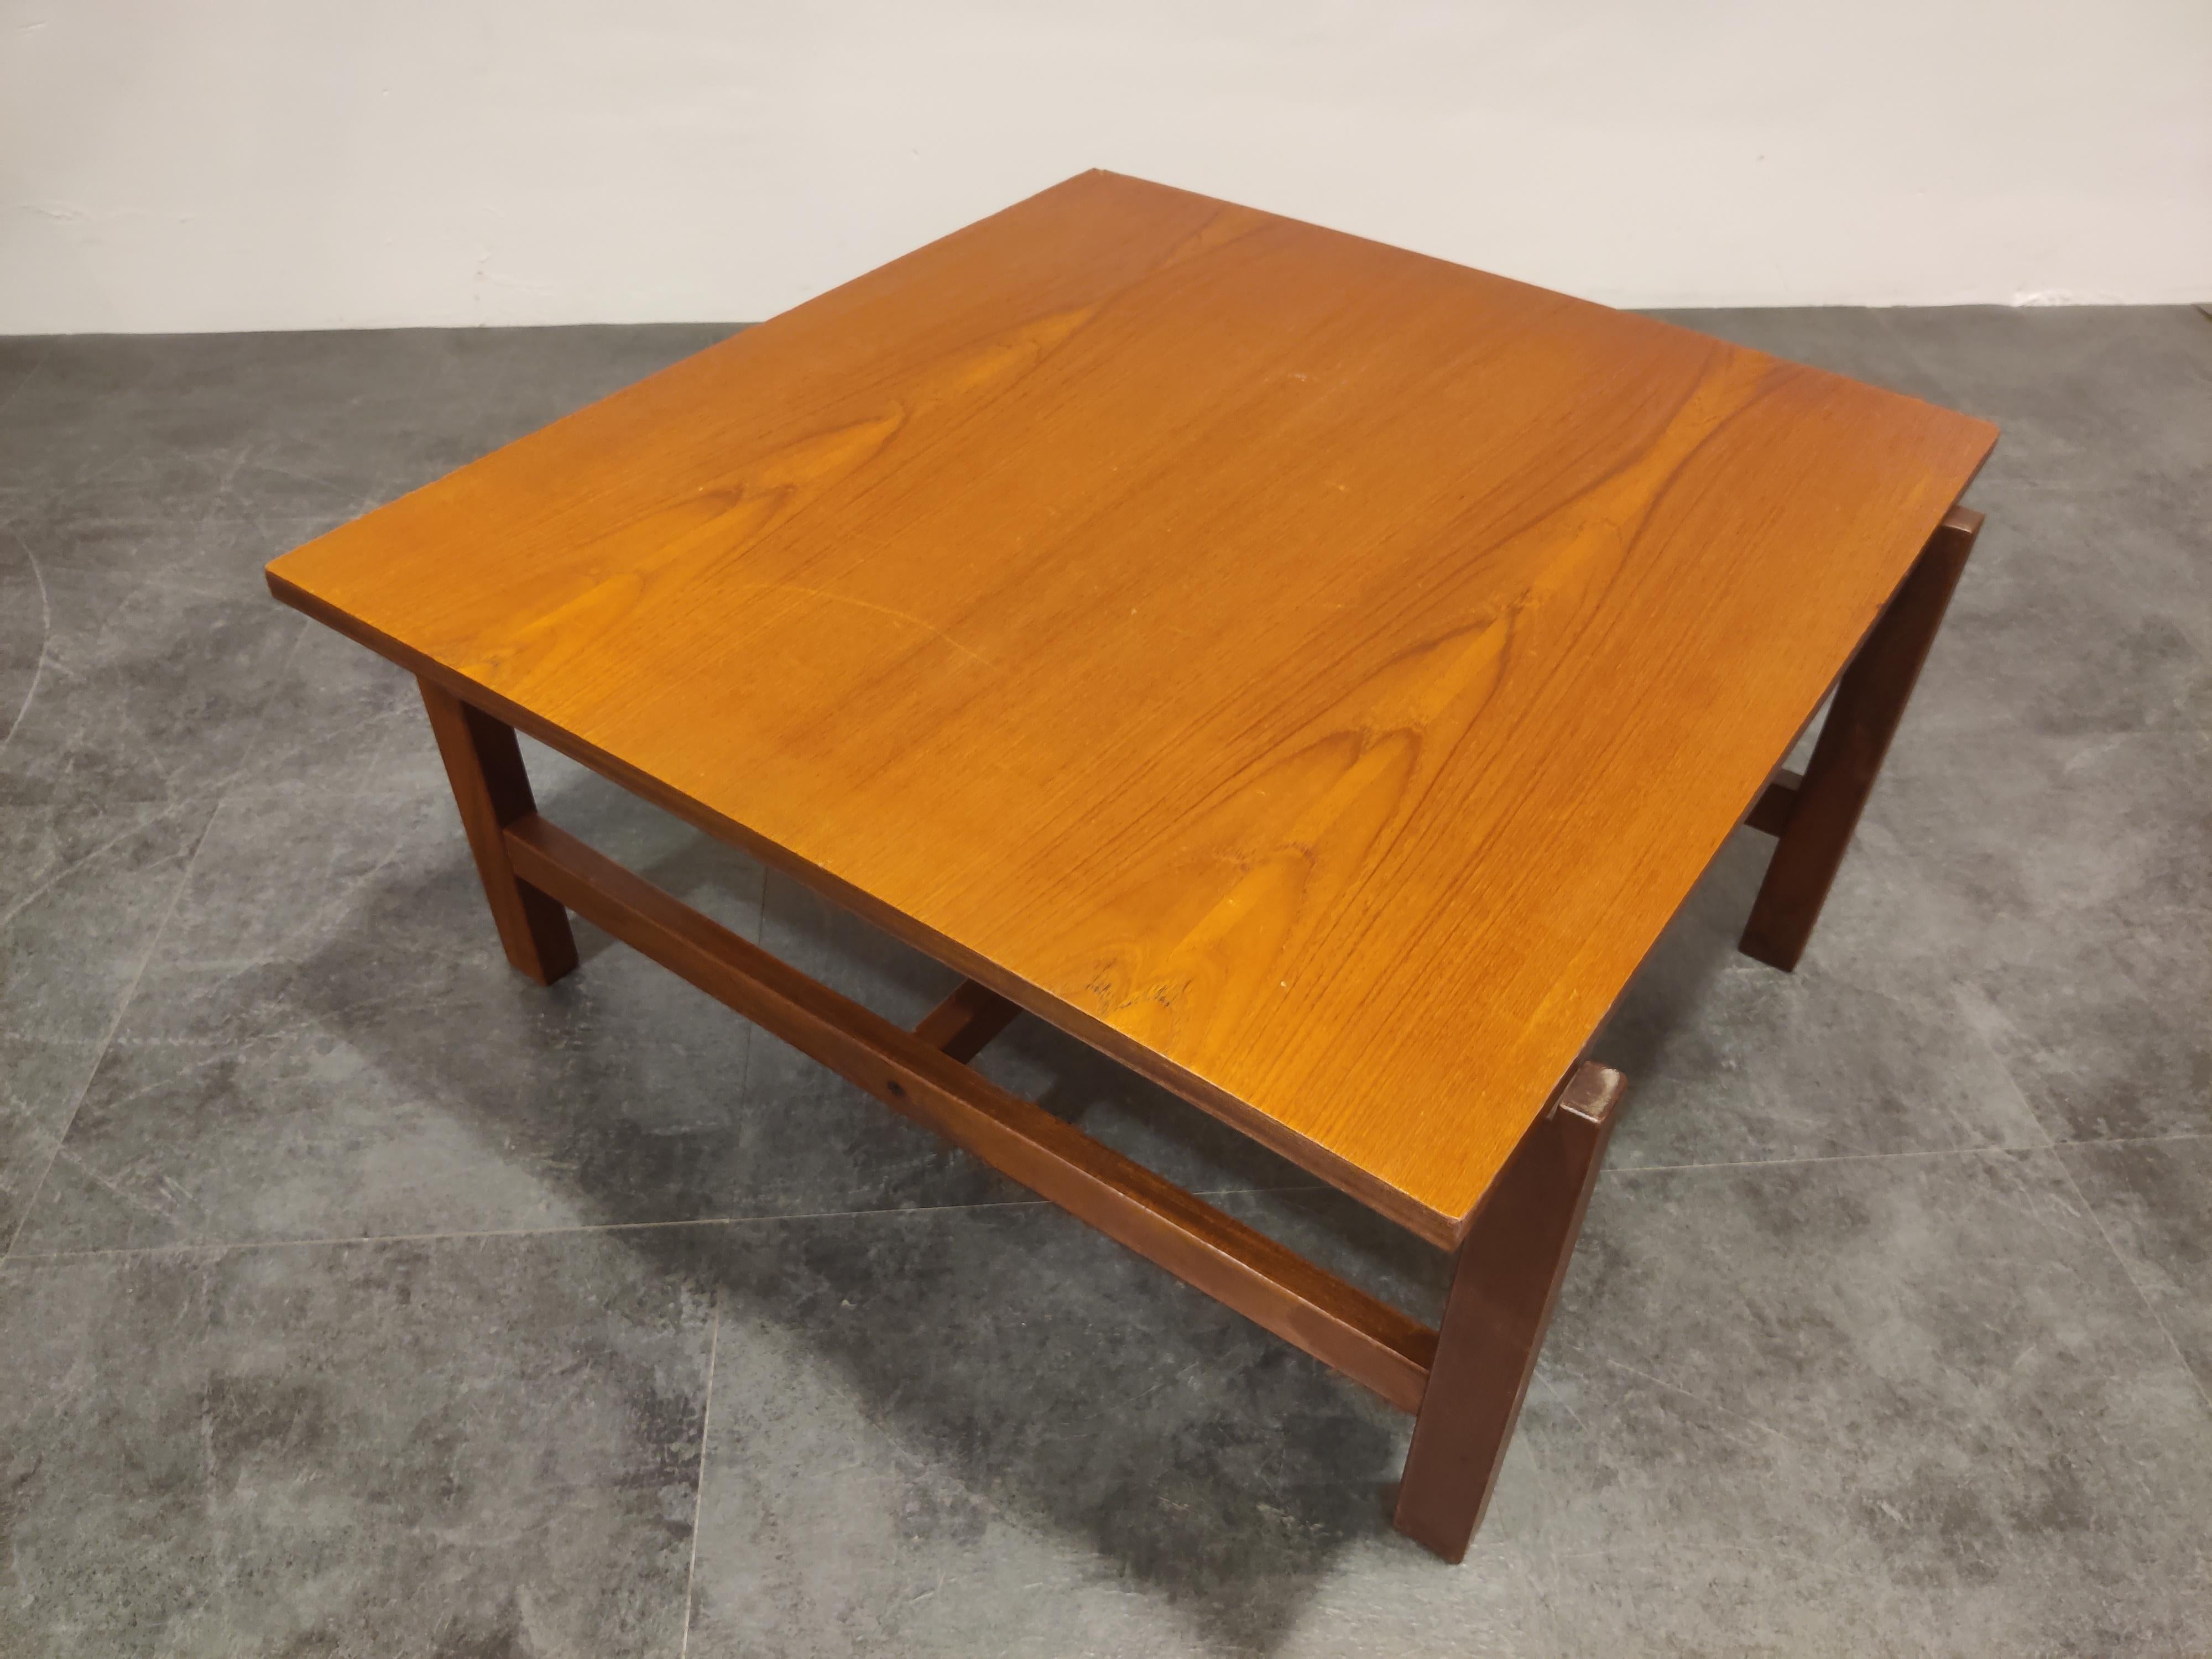 Midcentury coffee table with reversable top designed by Cees Braakman for Pastoe in de 1950s.

This teak wooden coffee table has a reversable top with teak or a white formica top.

Japanese series table base

Condition: normal user traces and